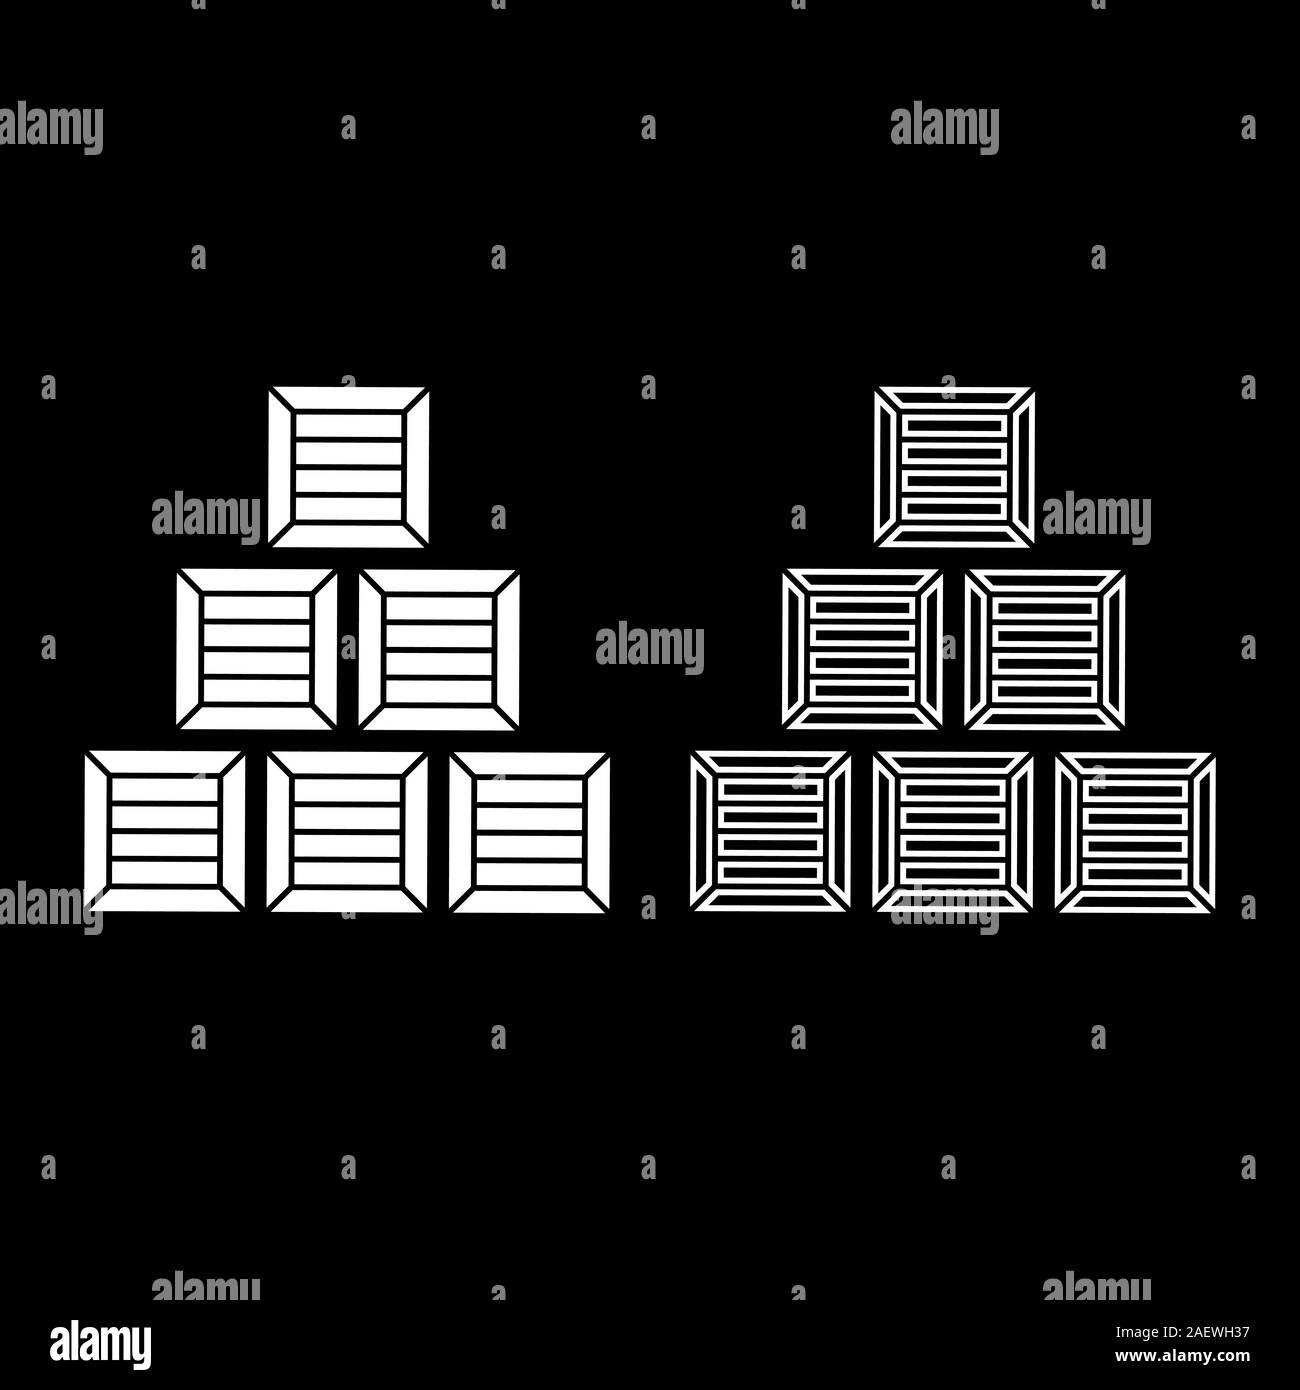 Pyramid crates Wooden boxs Containers icon outline set white color vector illustration flat style simple image Stock Vector